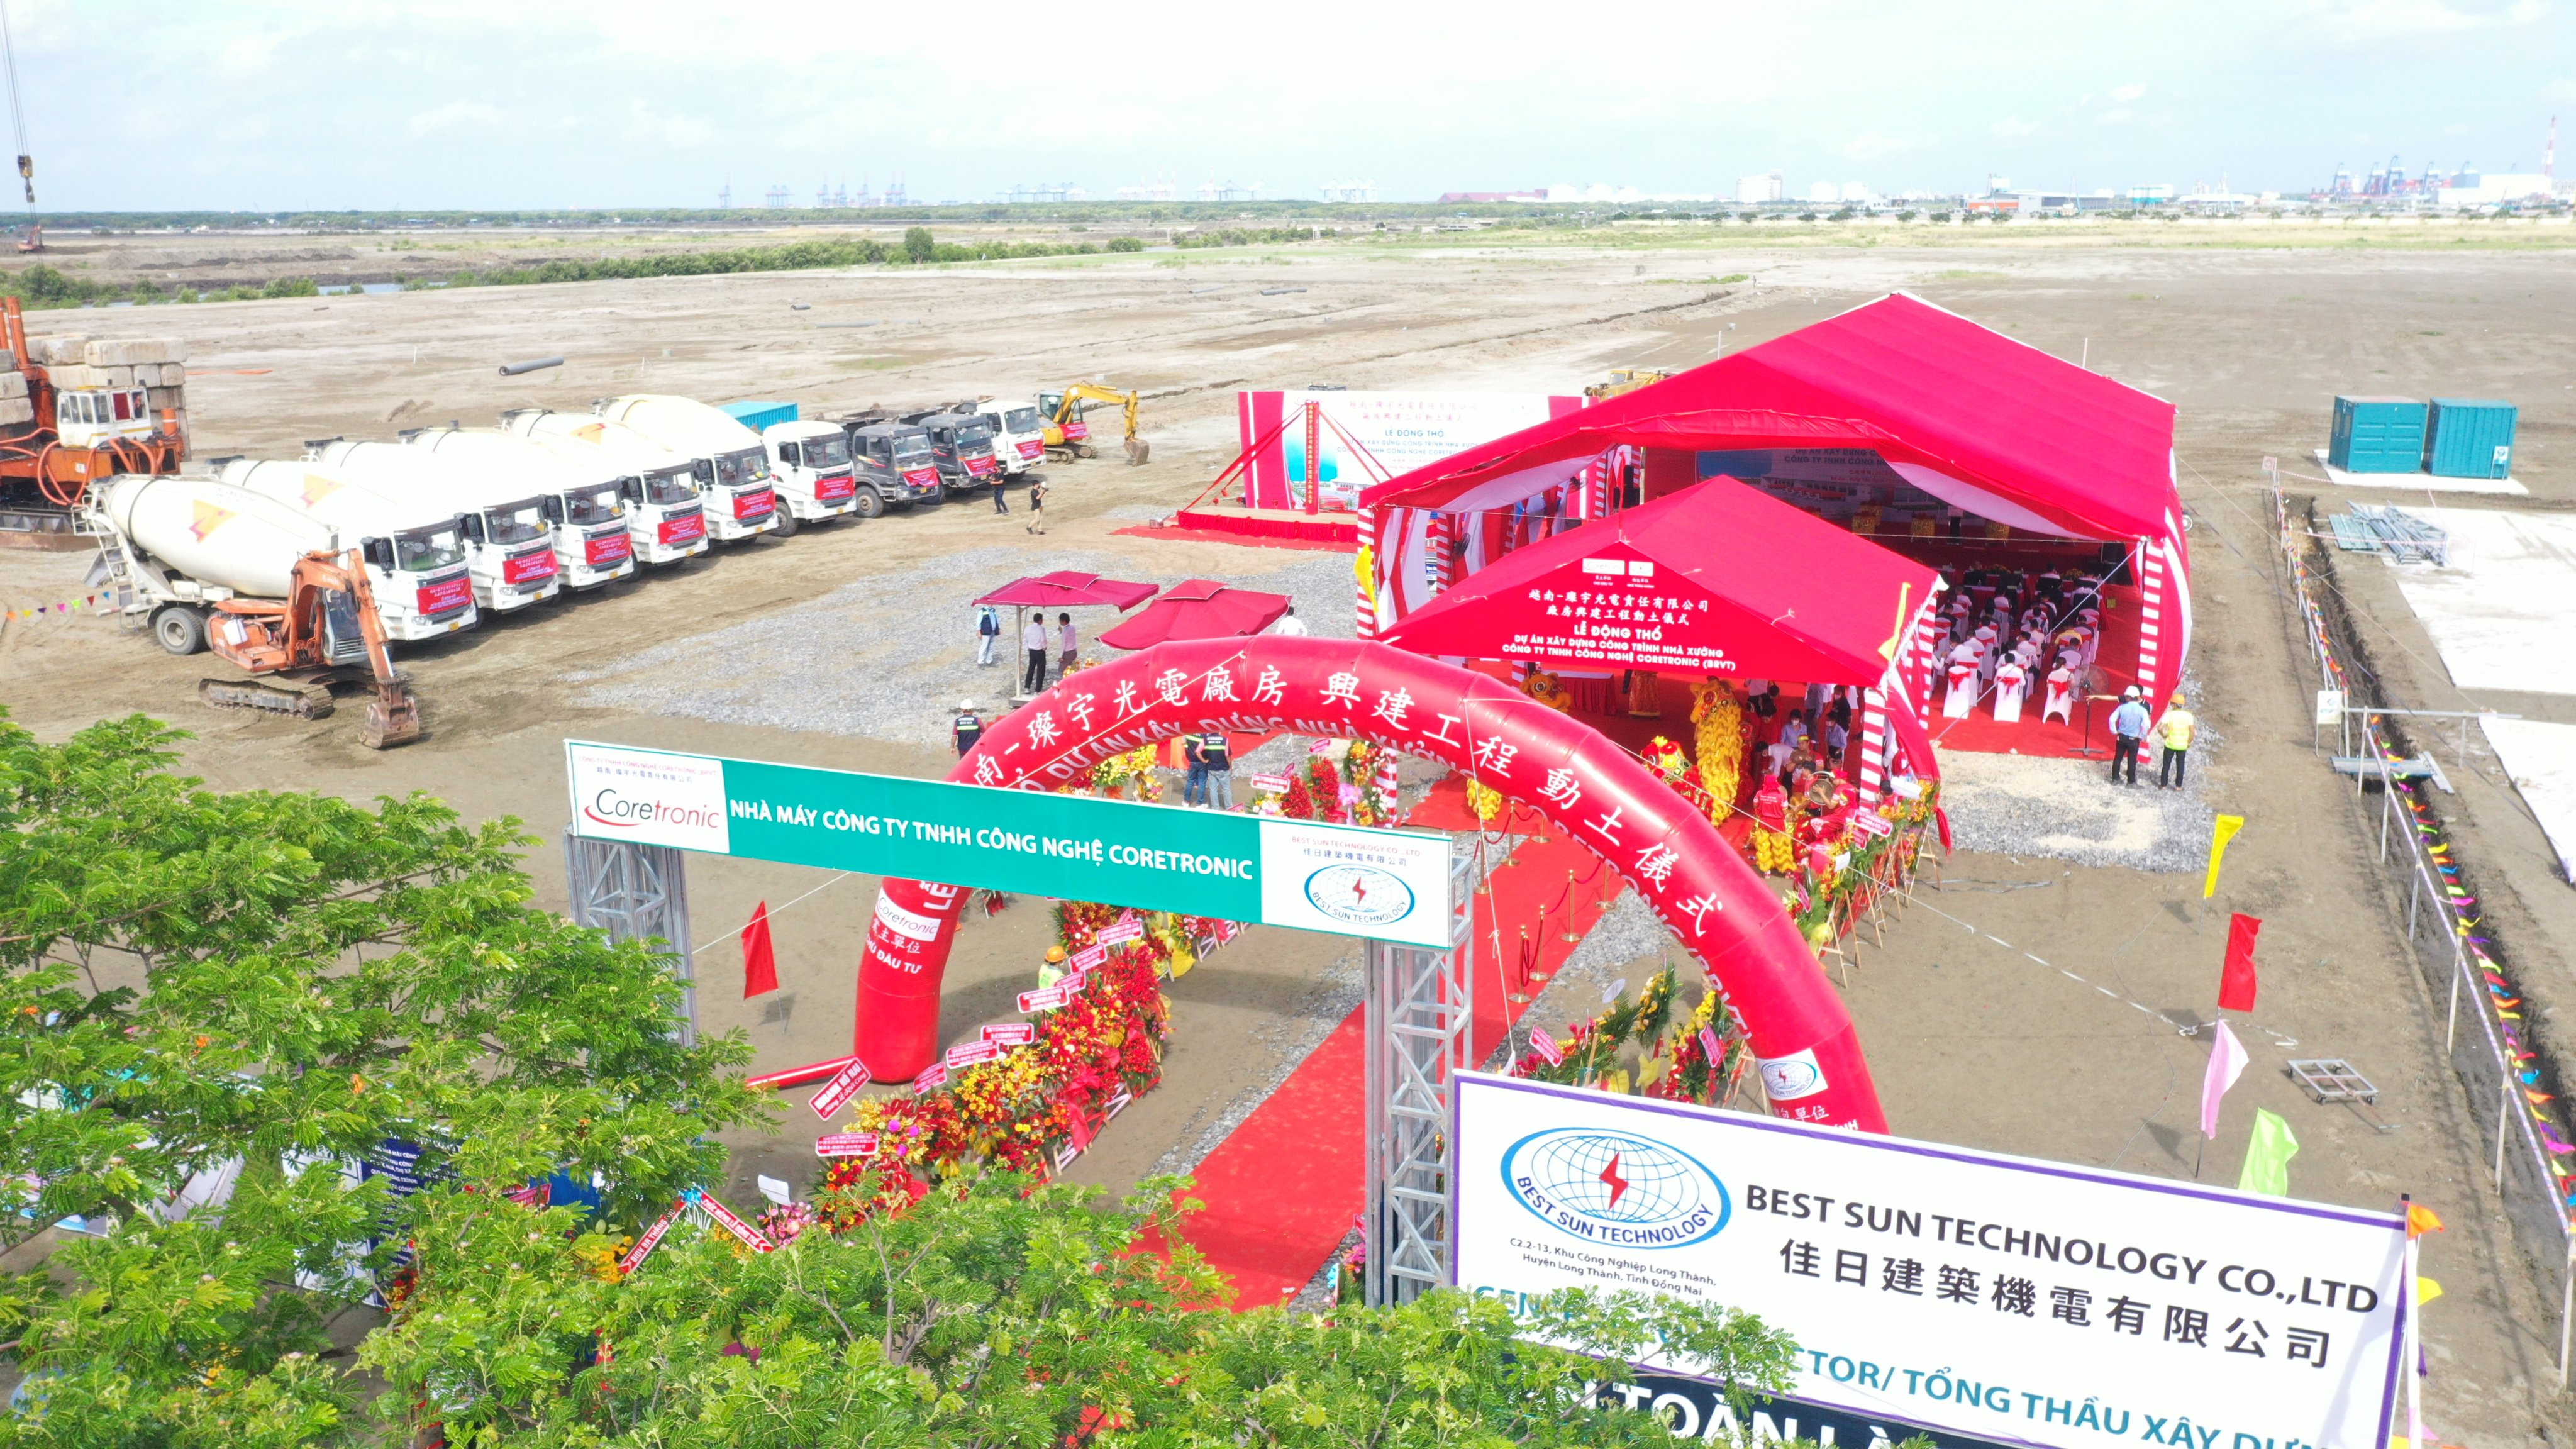 Coretronic Technology (BRVT) Company Limited established groundbreaking ceremony in Phu My 3 Specialized Industrial Park